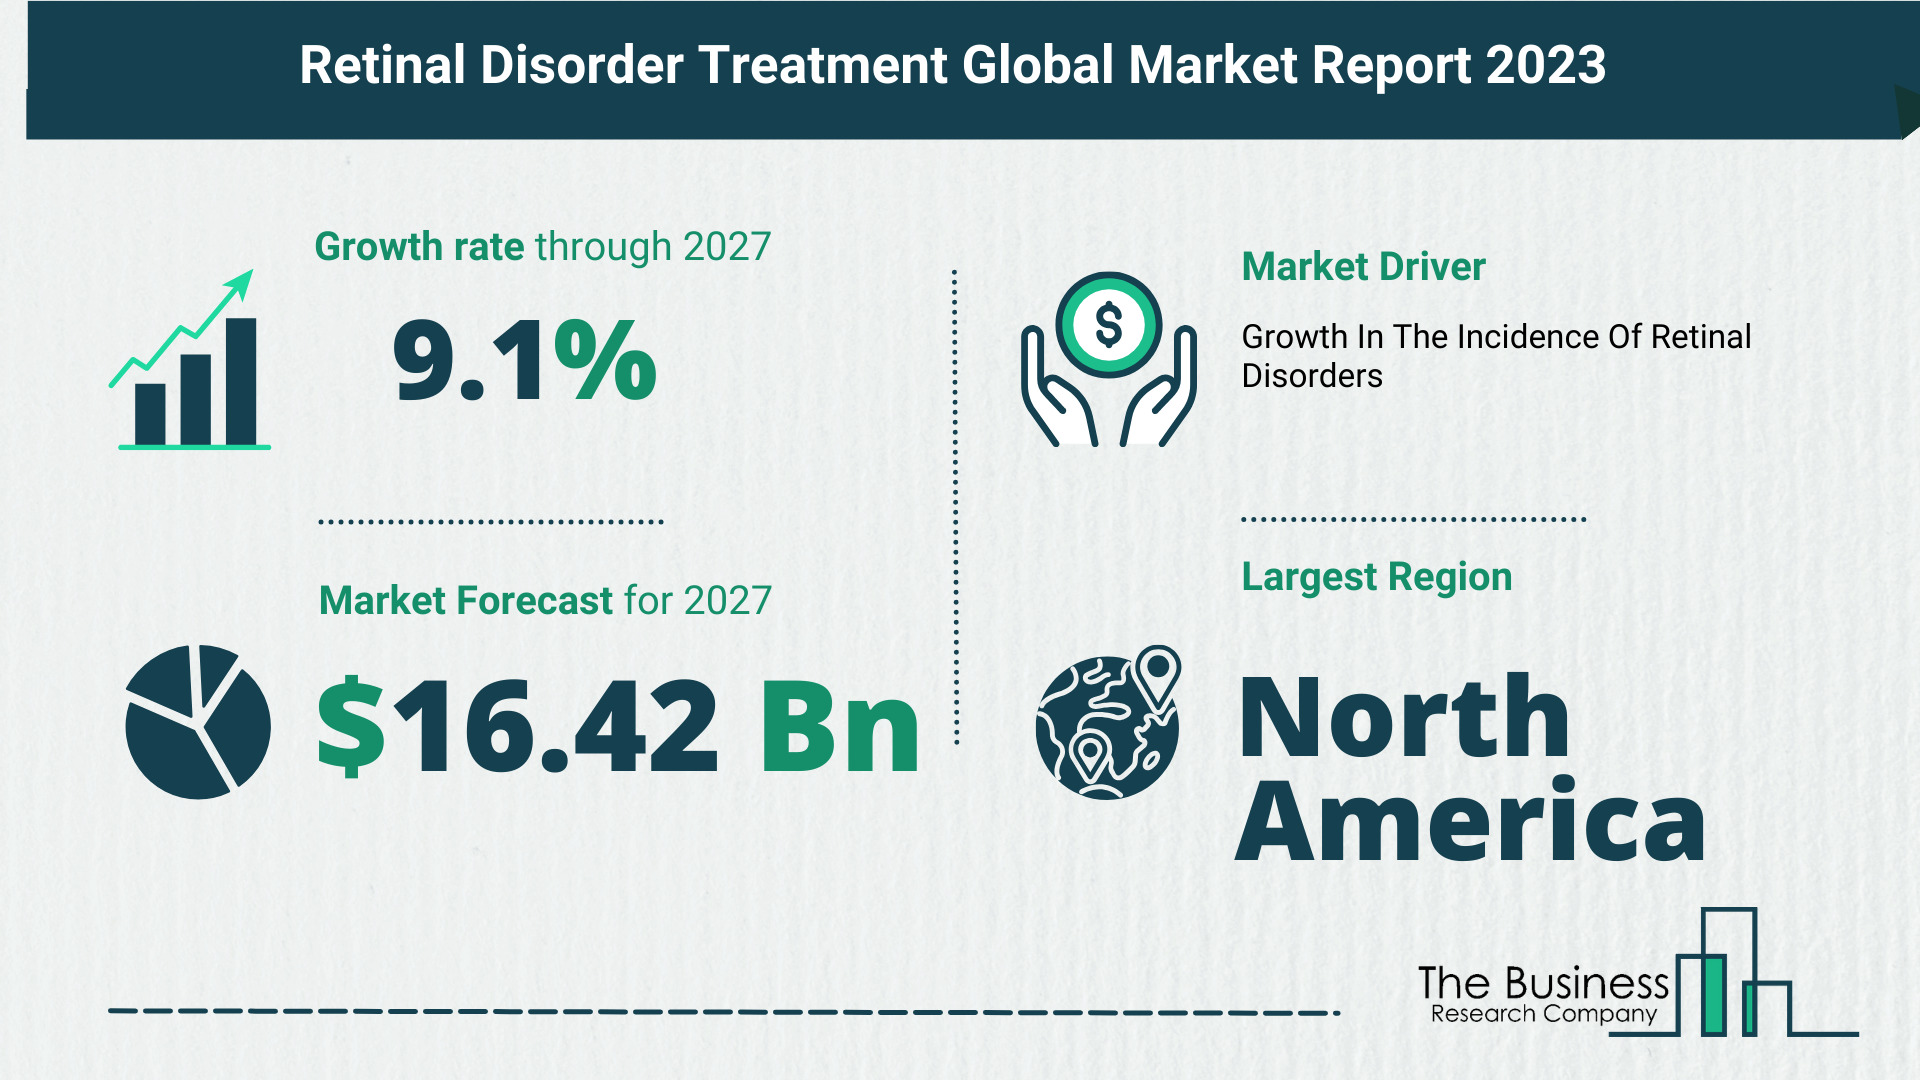 Retinal Disorder Treatment Market Forecast Until 2032 – Estimated Market Size And Growth Rate